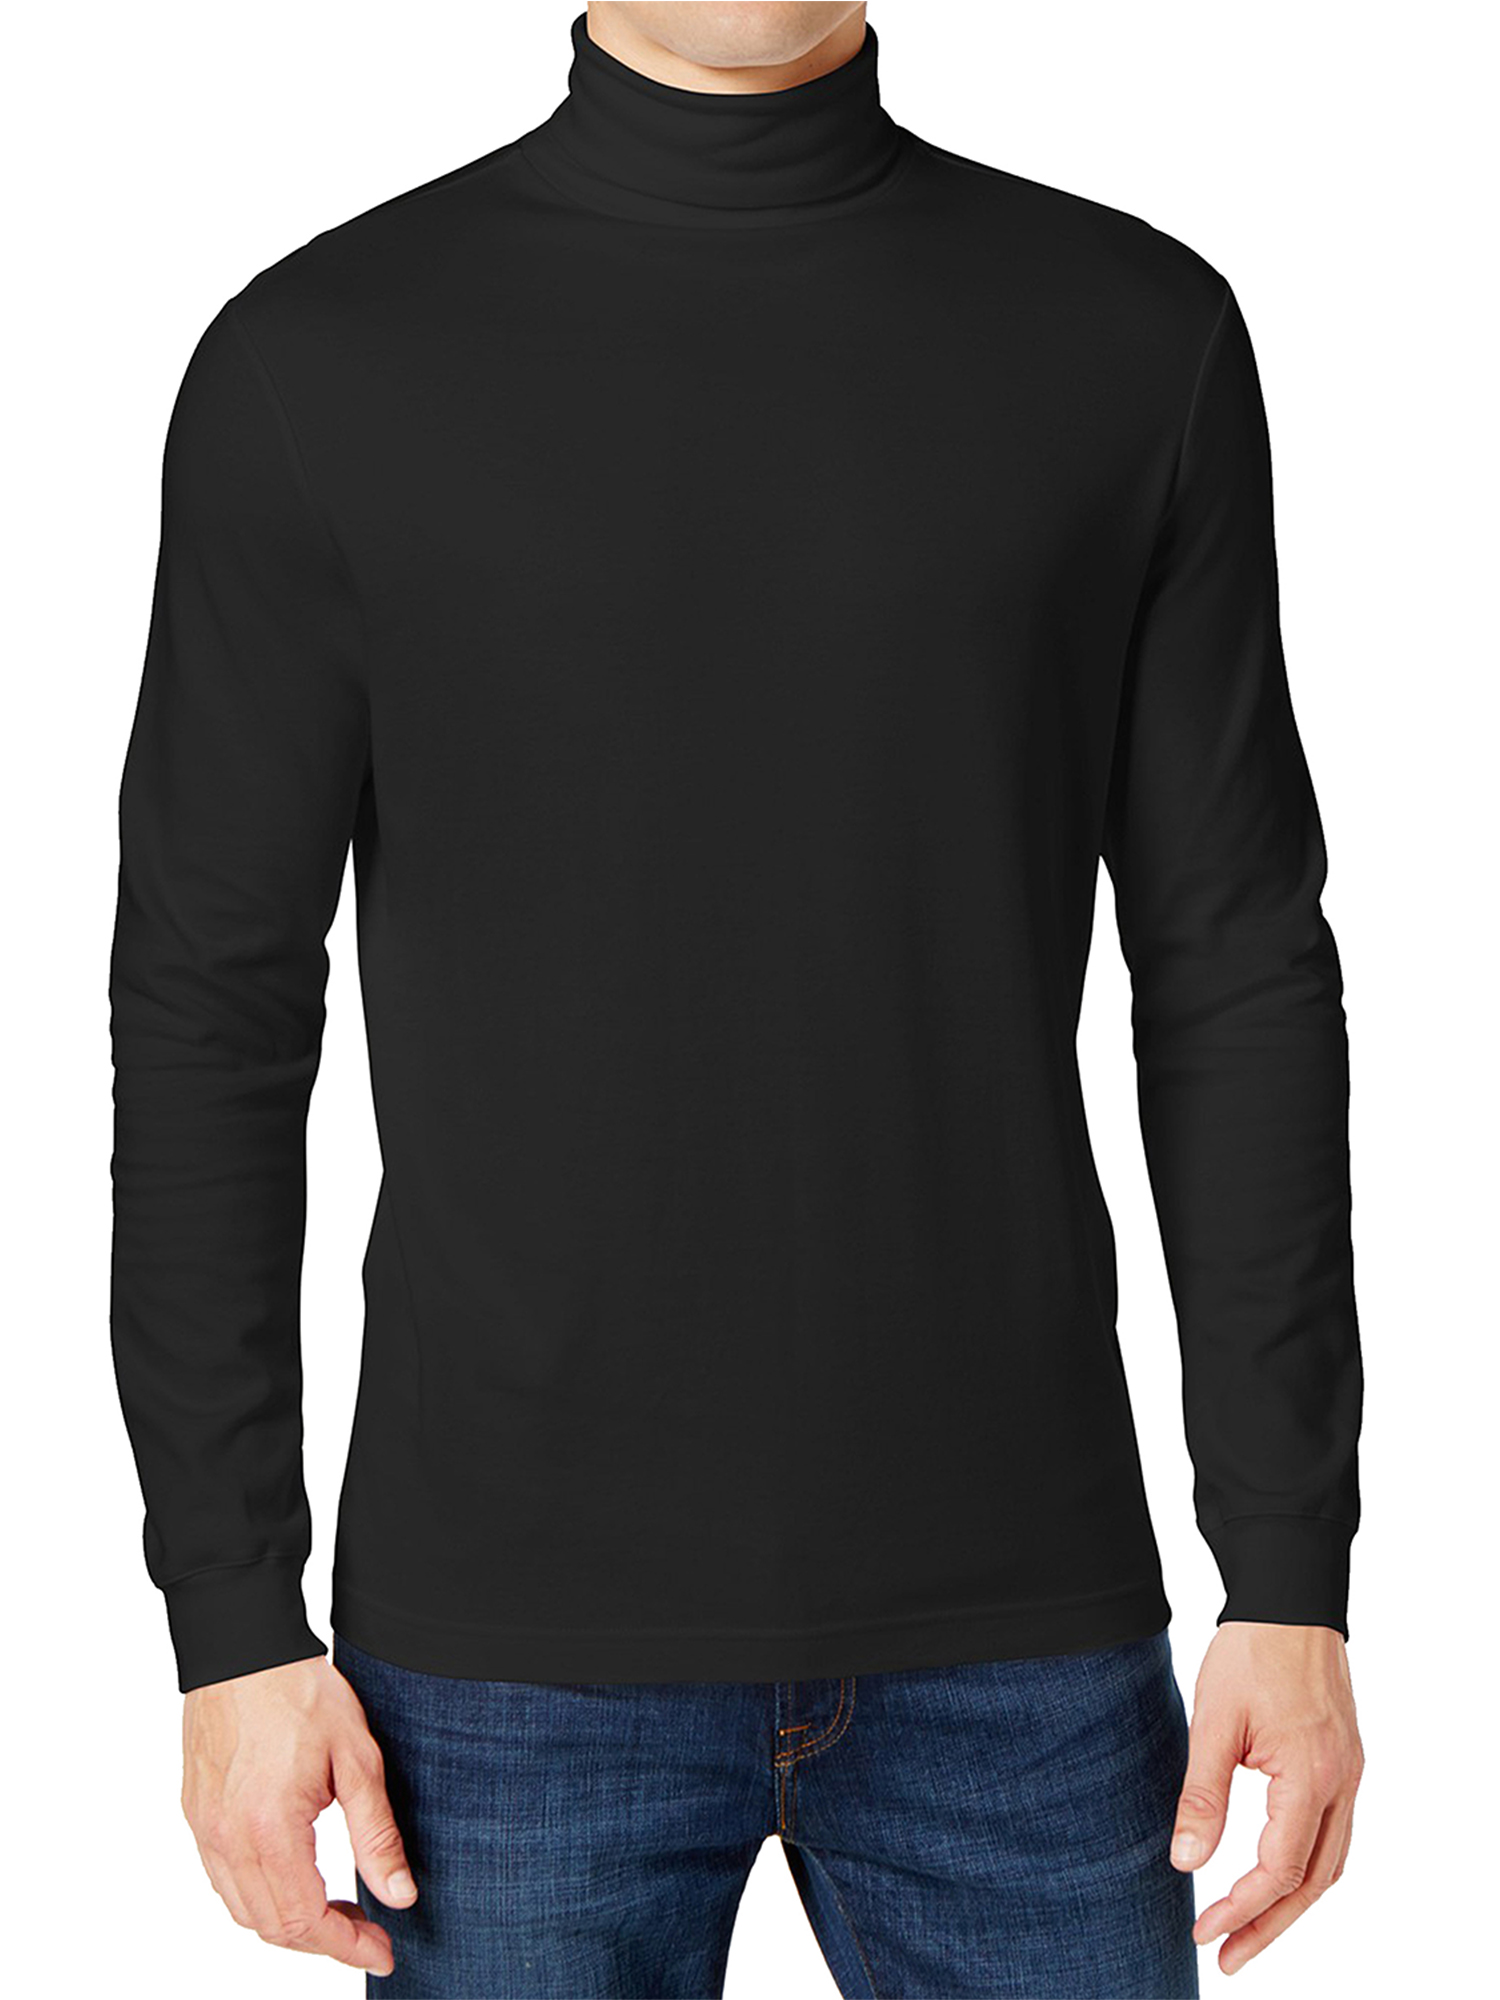 Under Armour Men's and Big Men's UA Tech T-Shirt with Long Sleeves ...